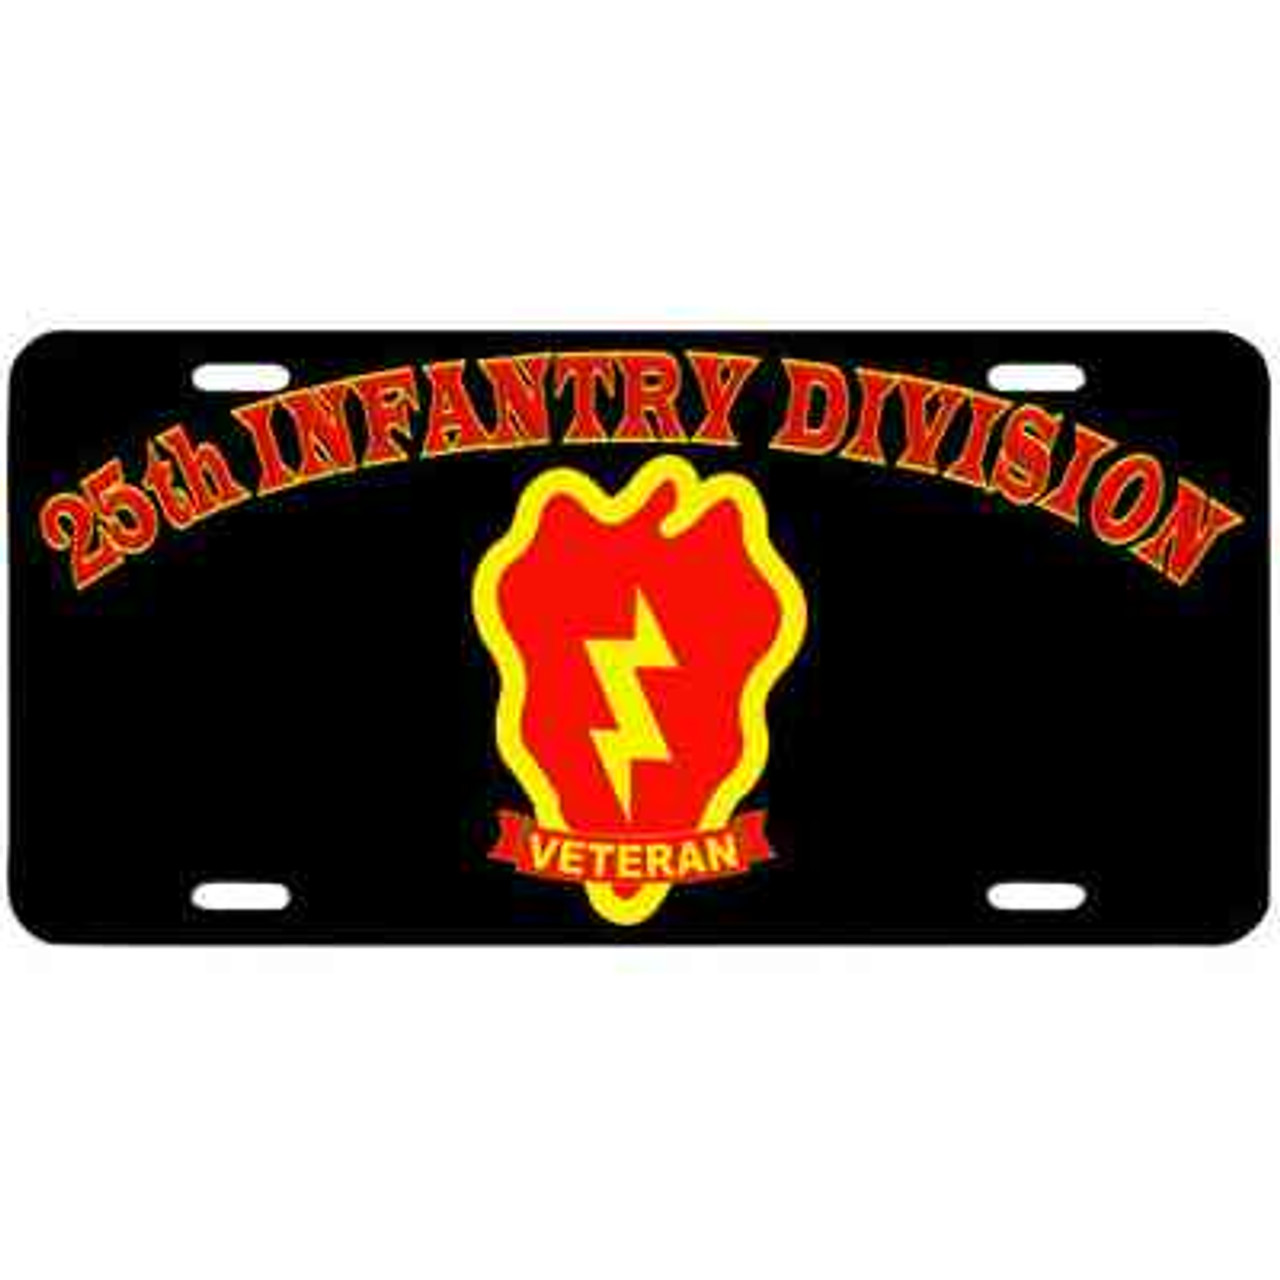 army 25th infantry division veteran license plate